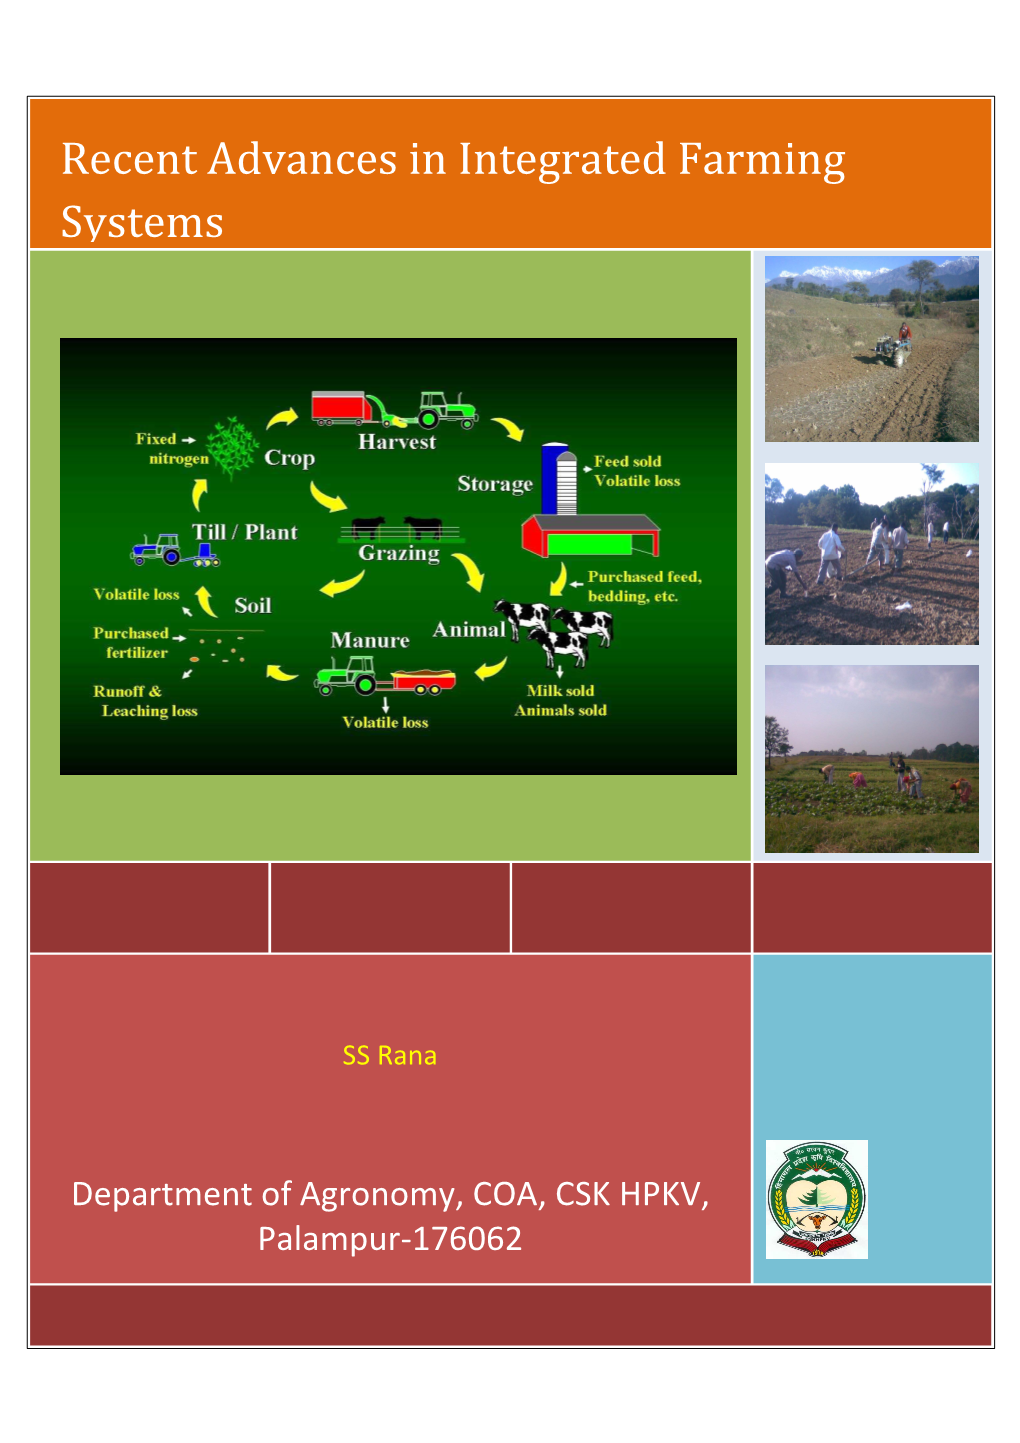 Recent Advances in Integrated Farming Systems